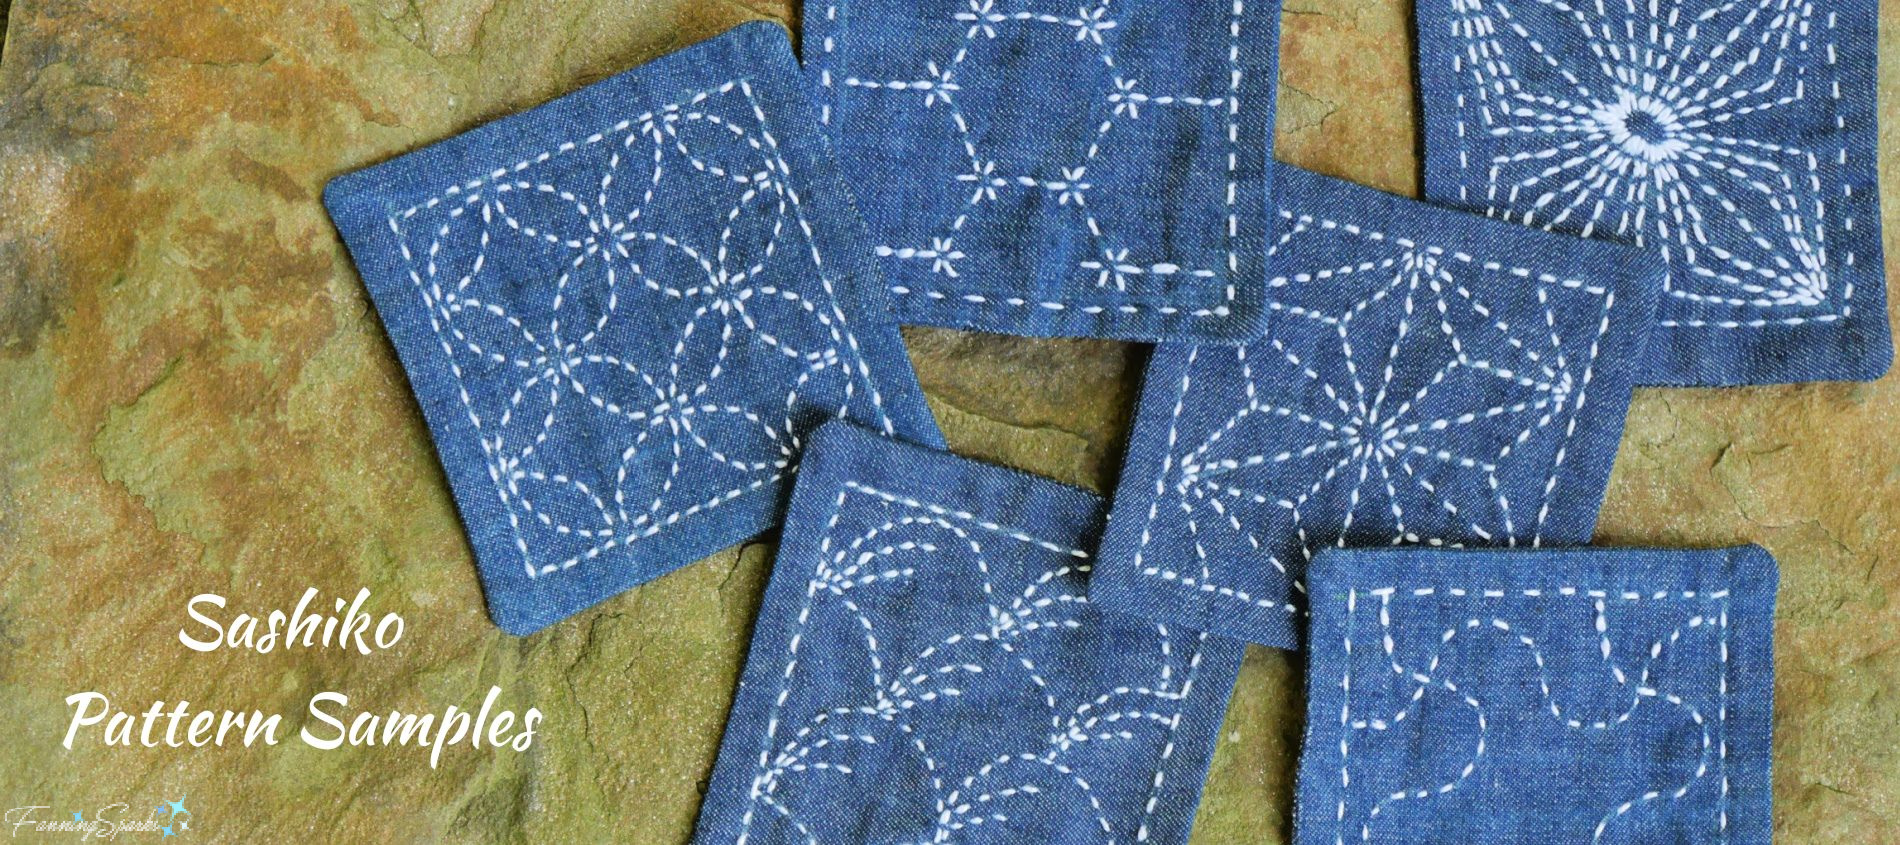 Why Sashiko Thread  Compare to the other - Upcycle Stitches